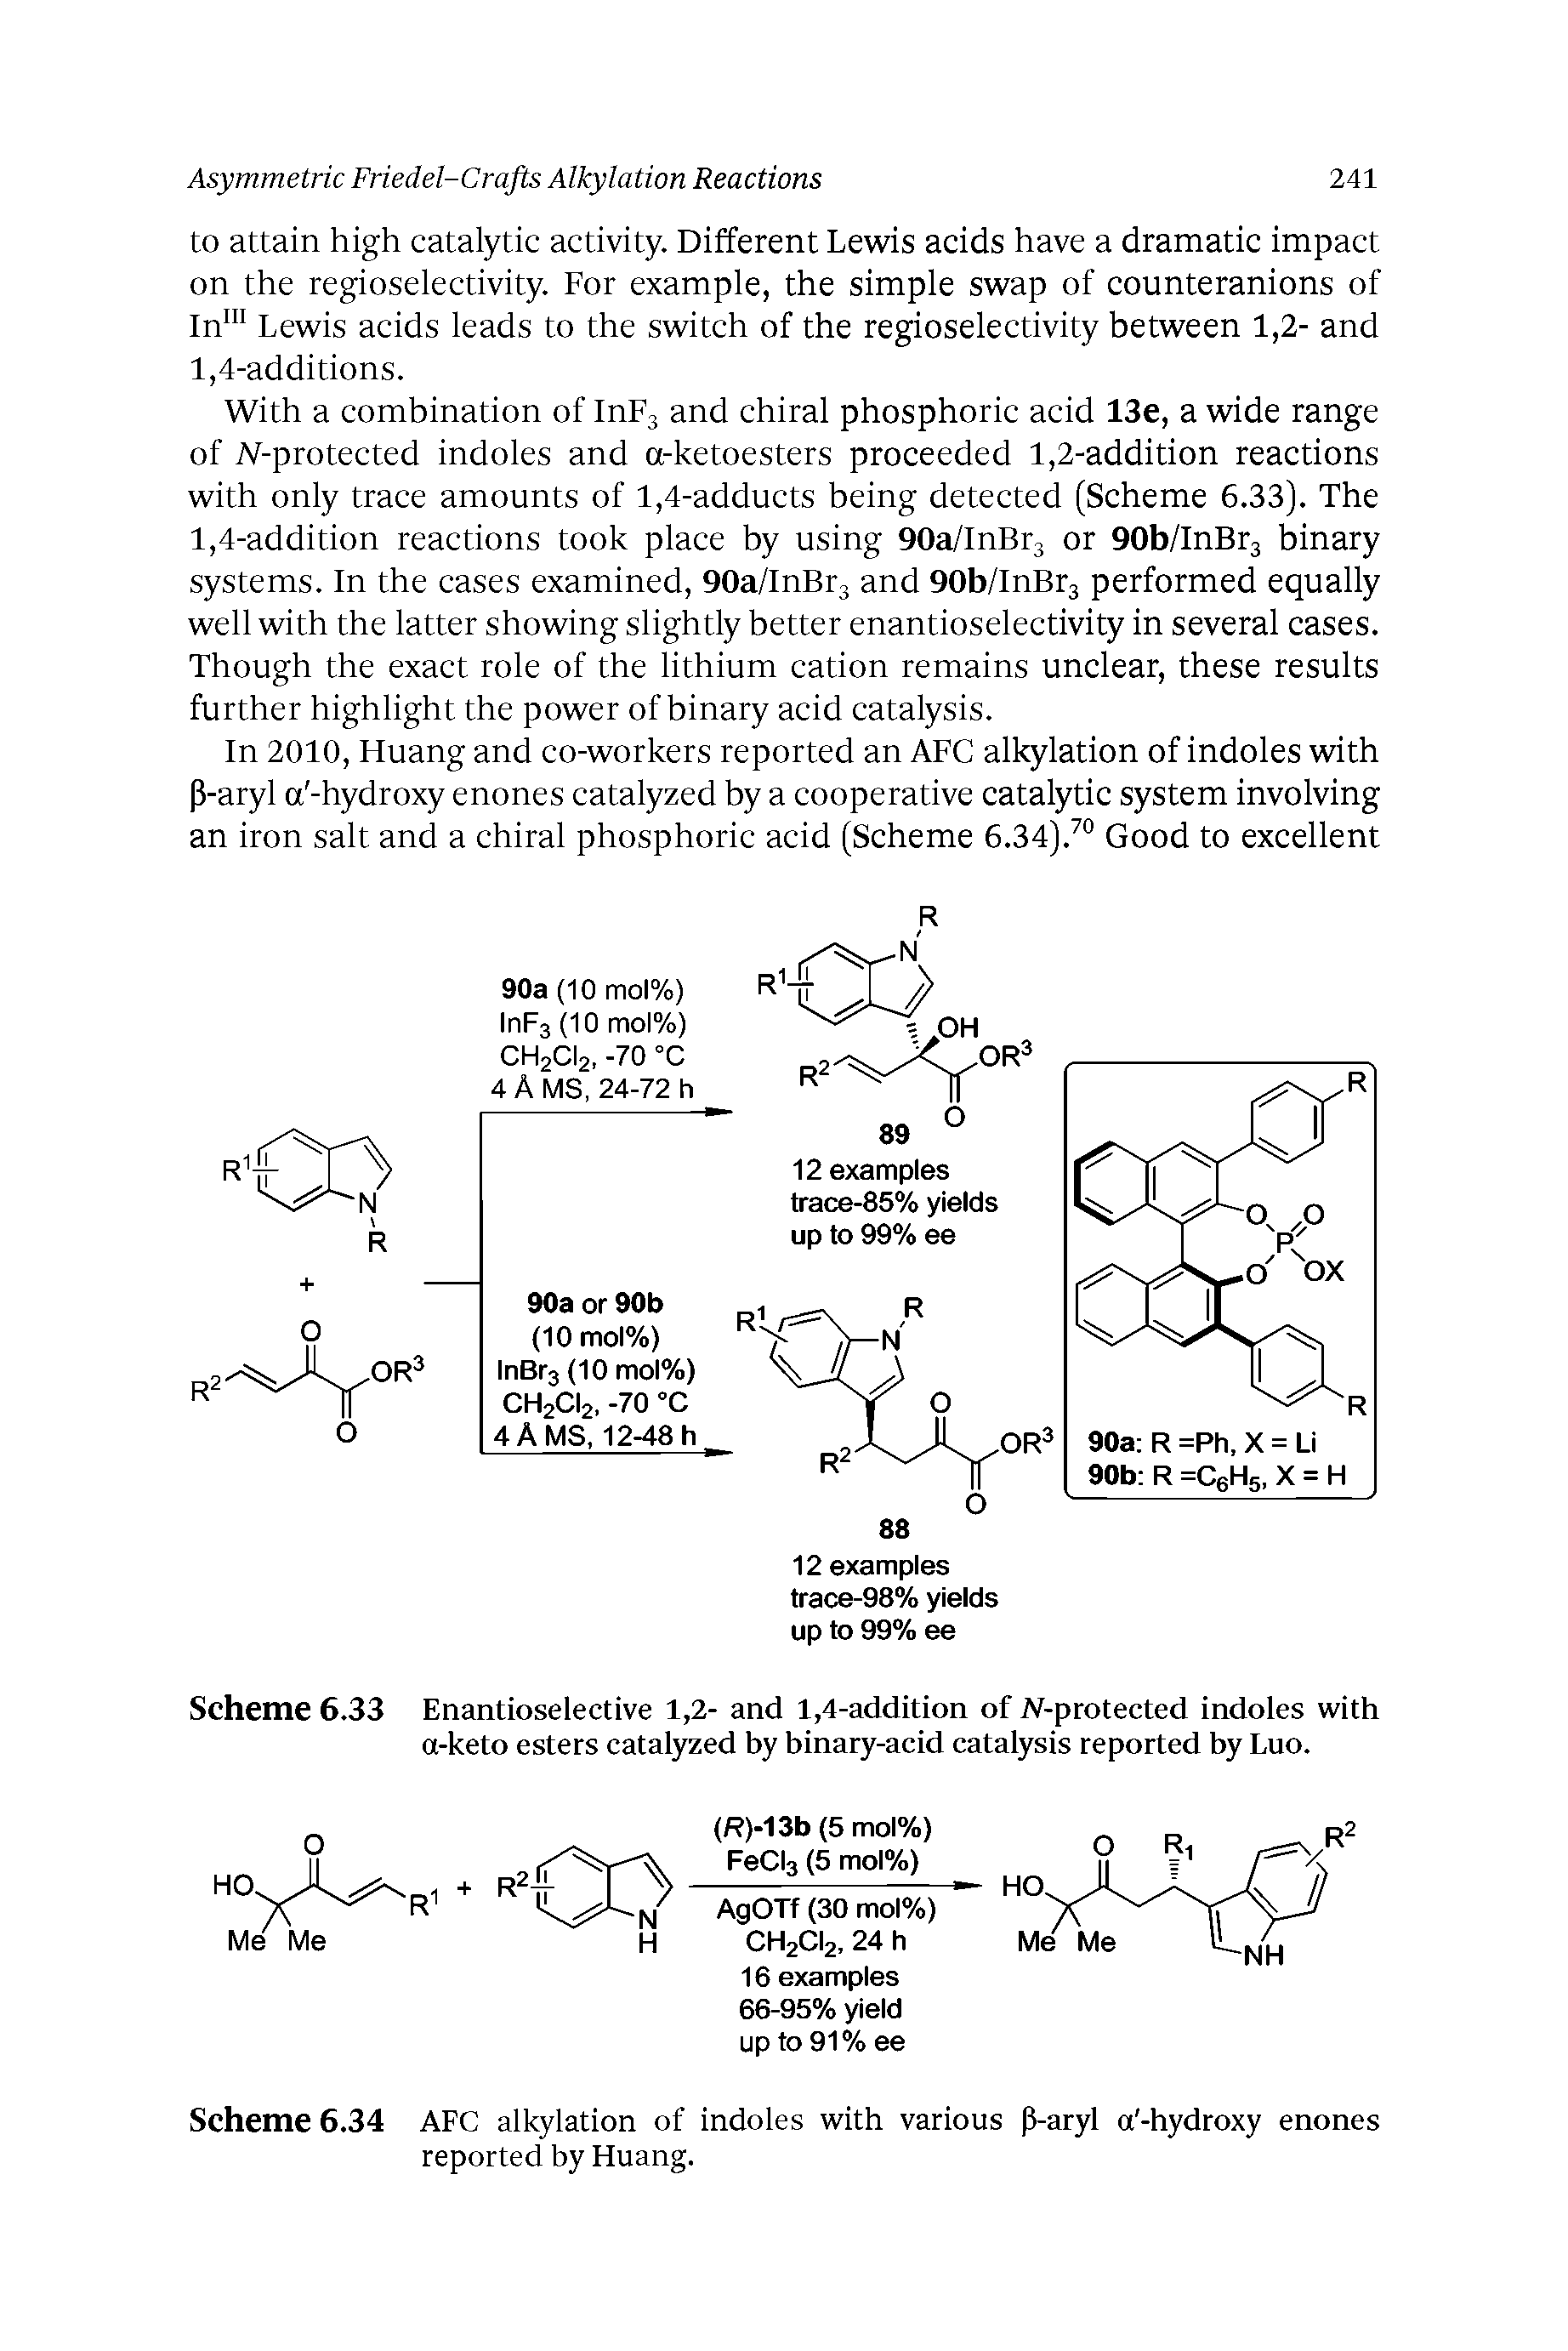 Scheme 6.33 Enantioselective 1,2- and 1,4-addition of N-protected indoles with a-keto esters catalyzed by binary-acid catalysis reported by Luo.